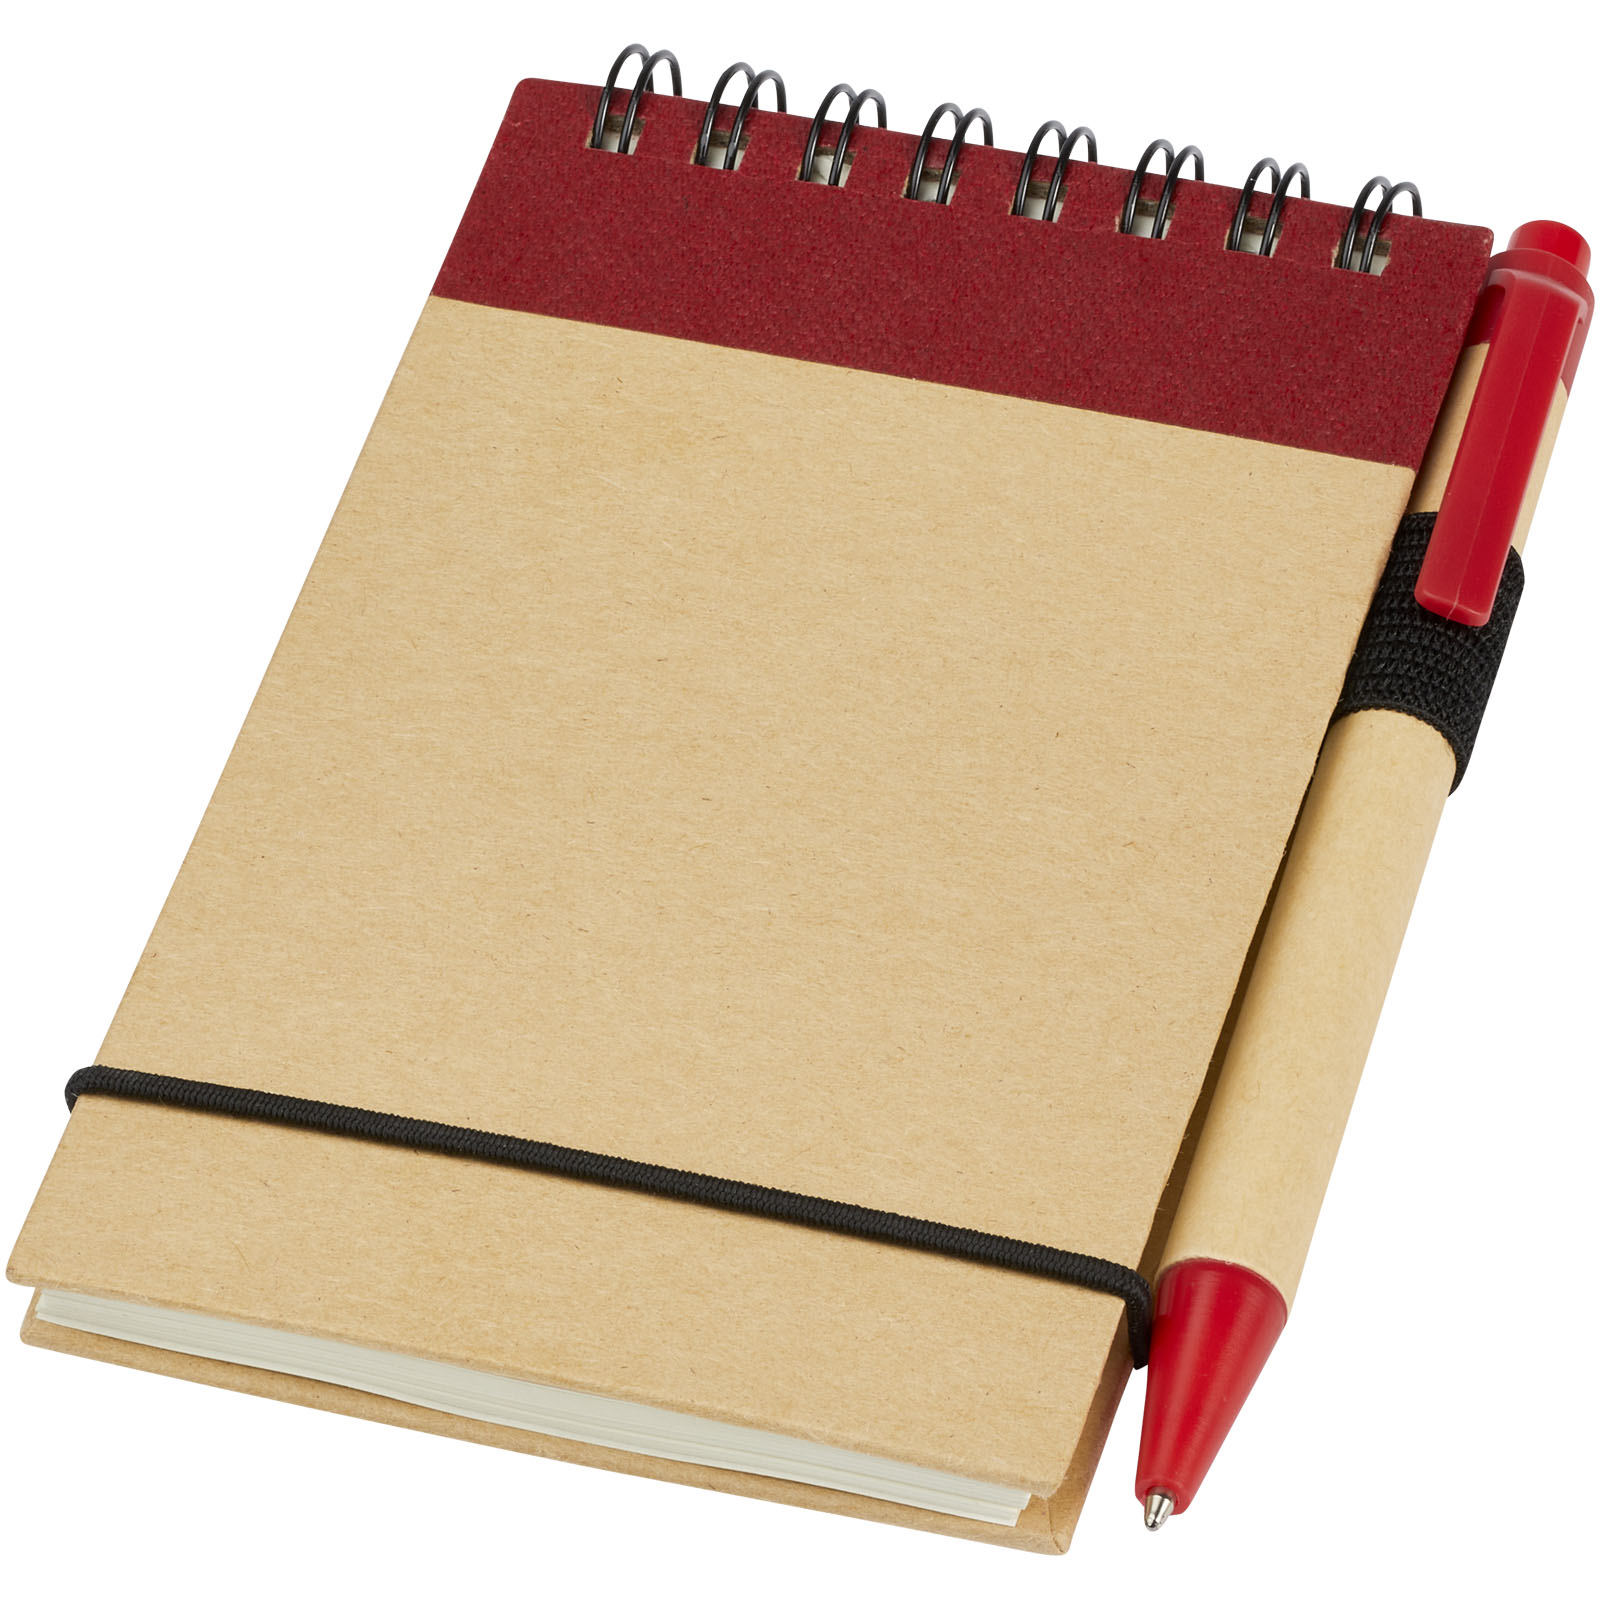 Notebooks & Desk Essentials - Zuse A7 recycled jotter notepad with pen